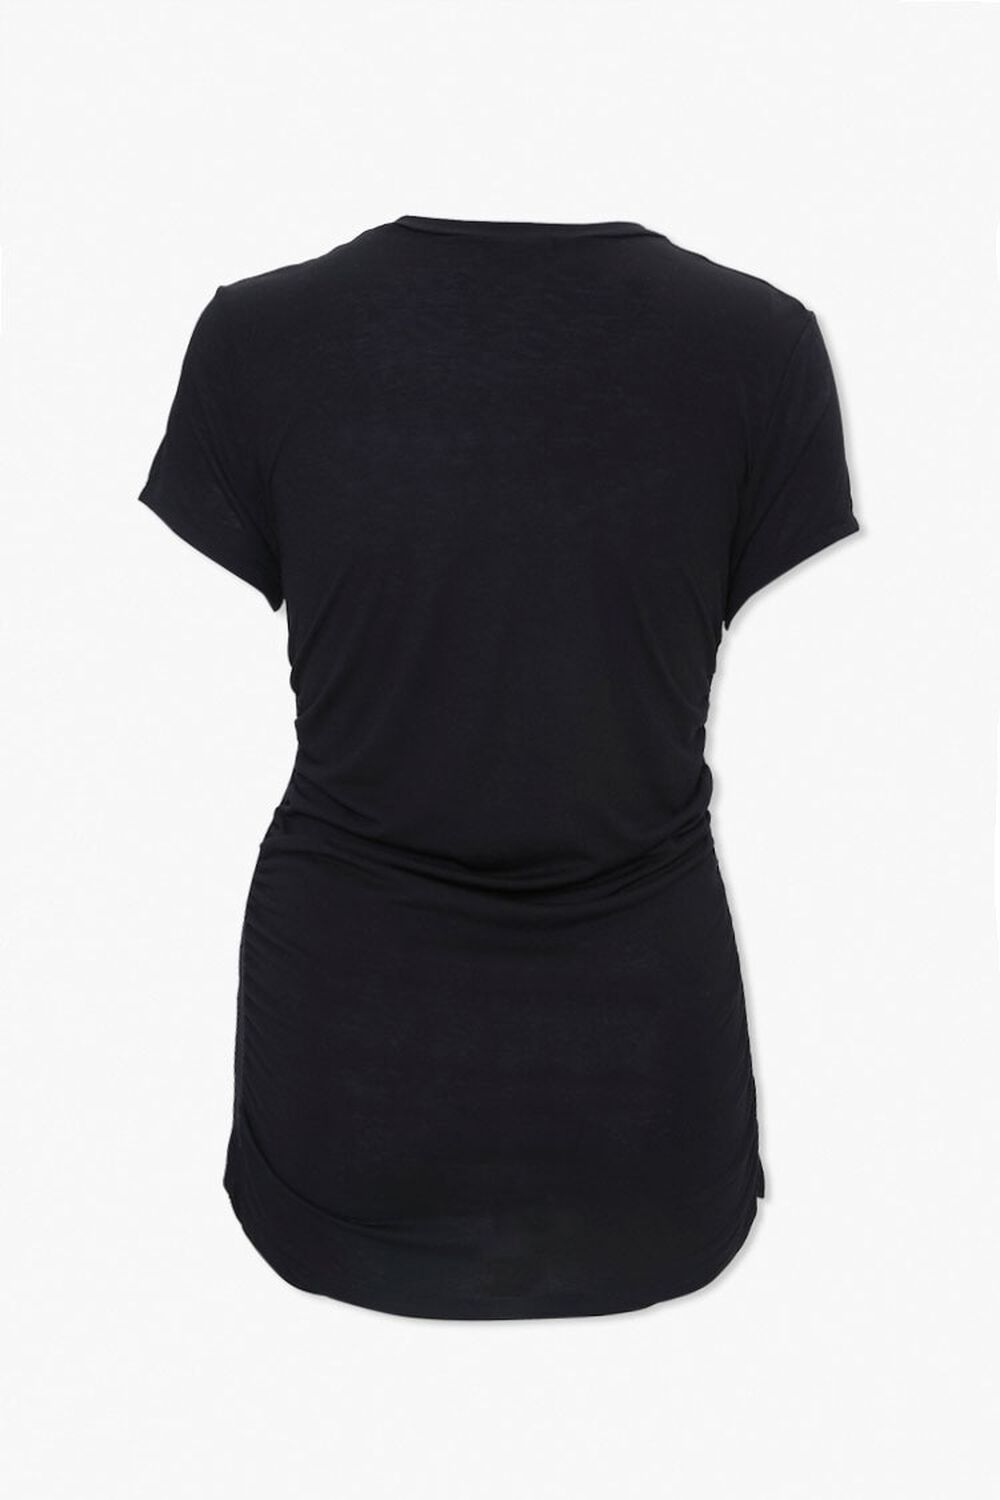 Plus Size Ruched Tee, image 3